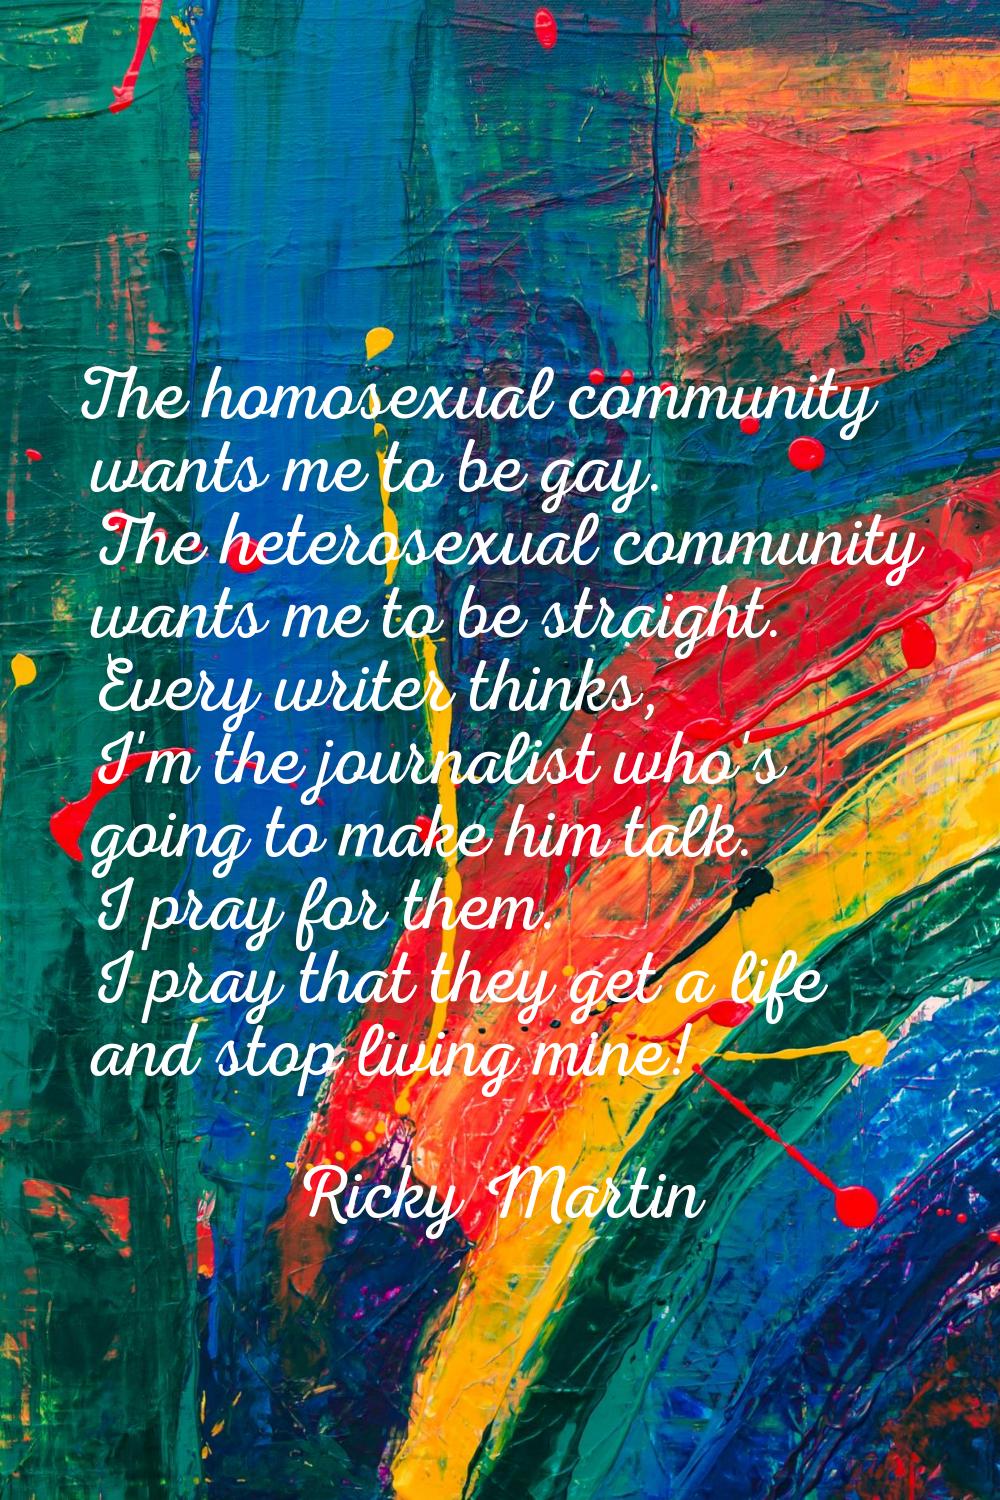 The homosexual community wants me to be gay. The heterosexual community wants me to be straight. Ev